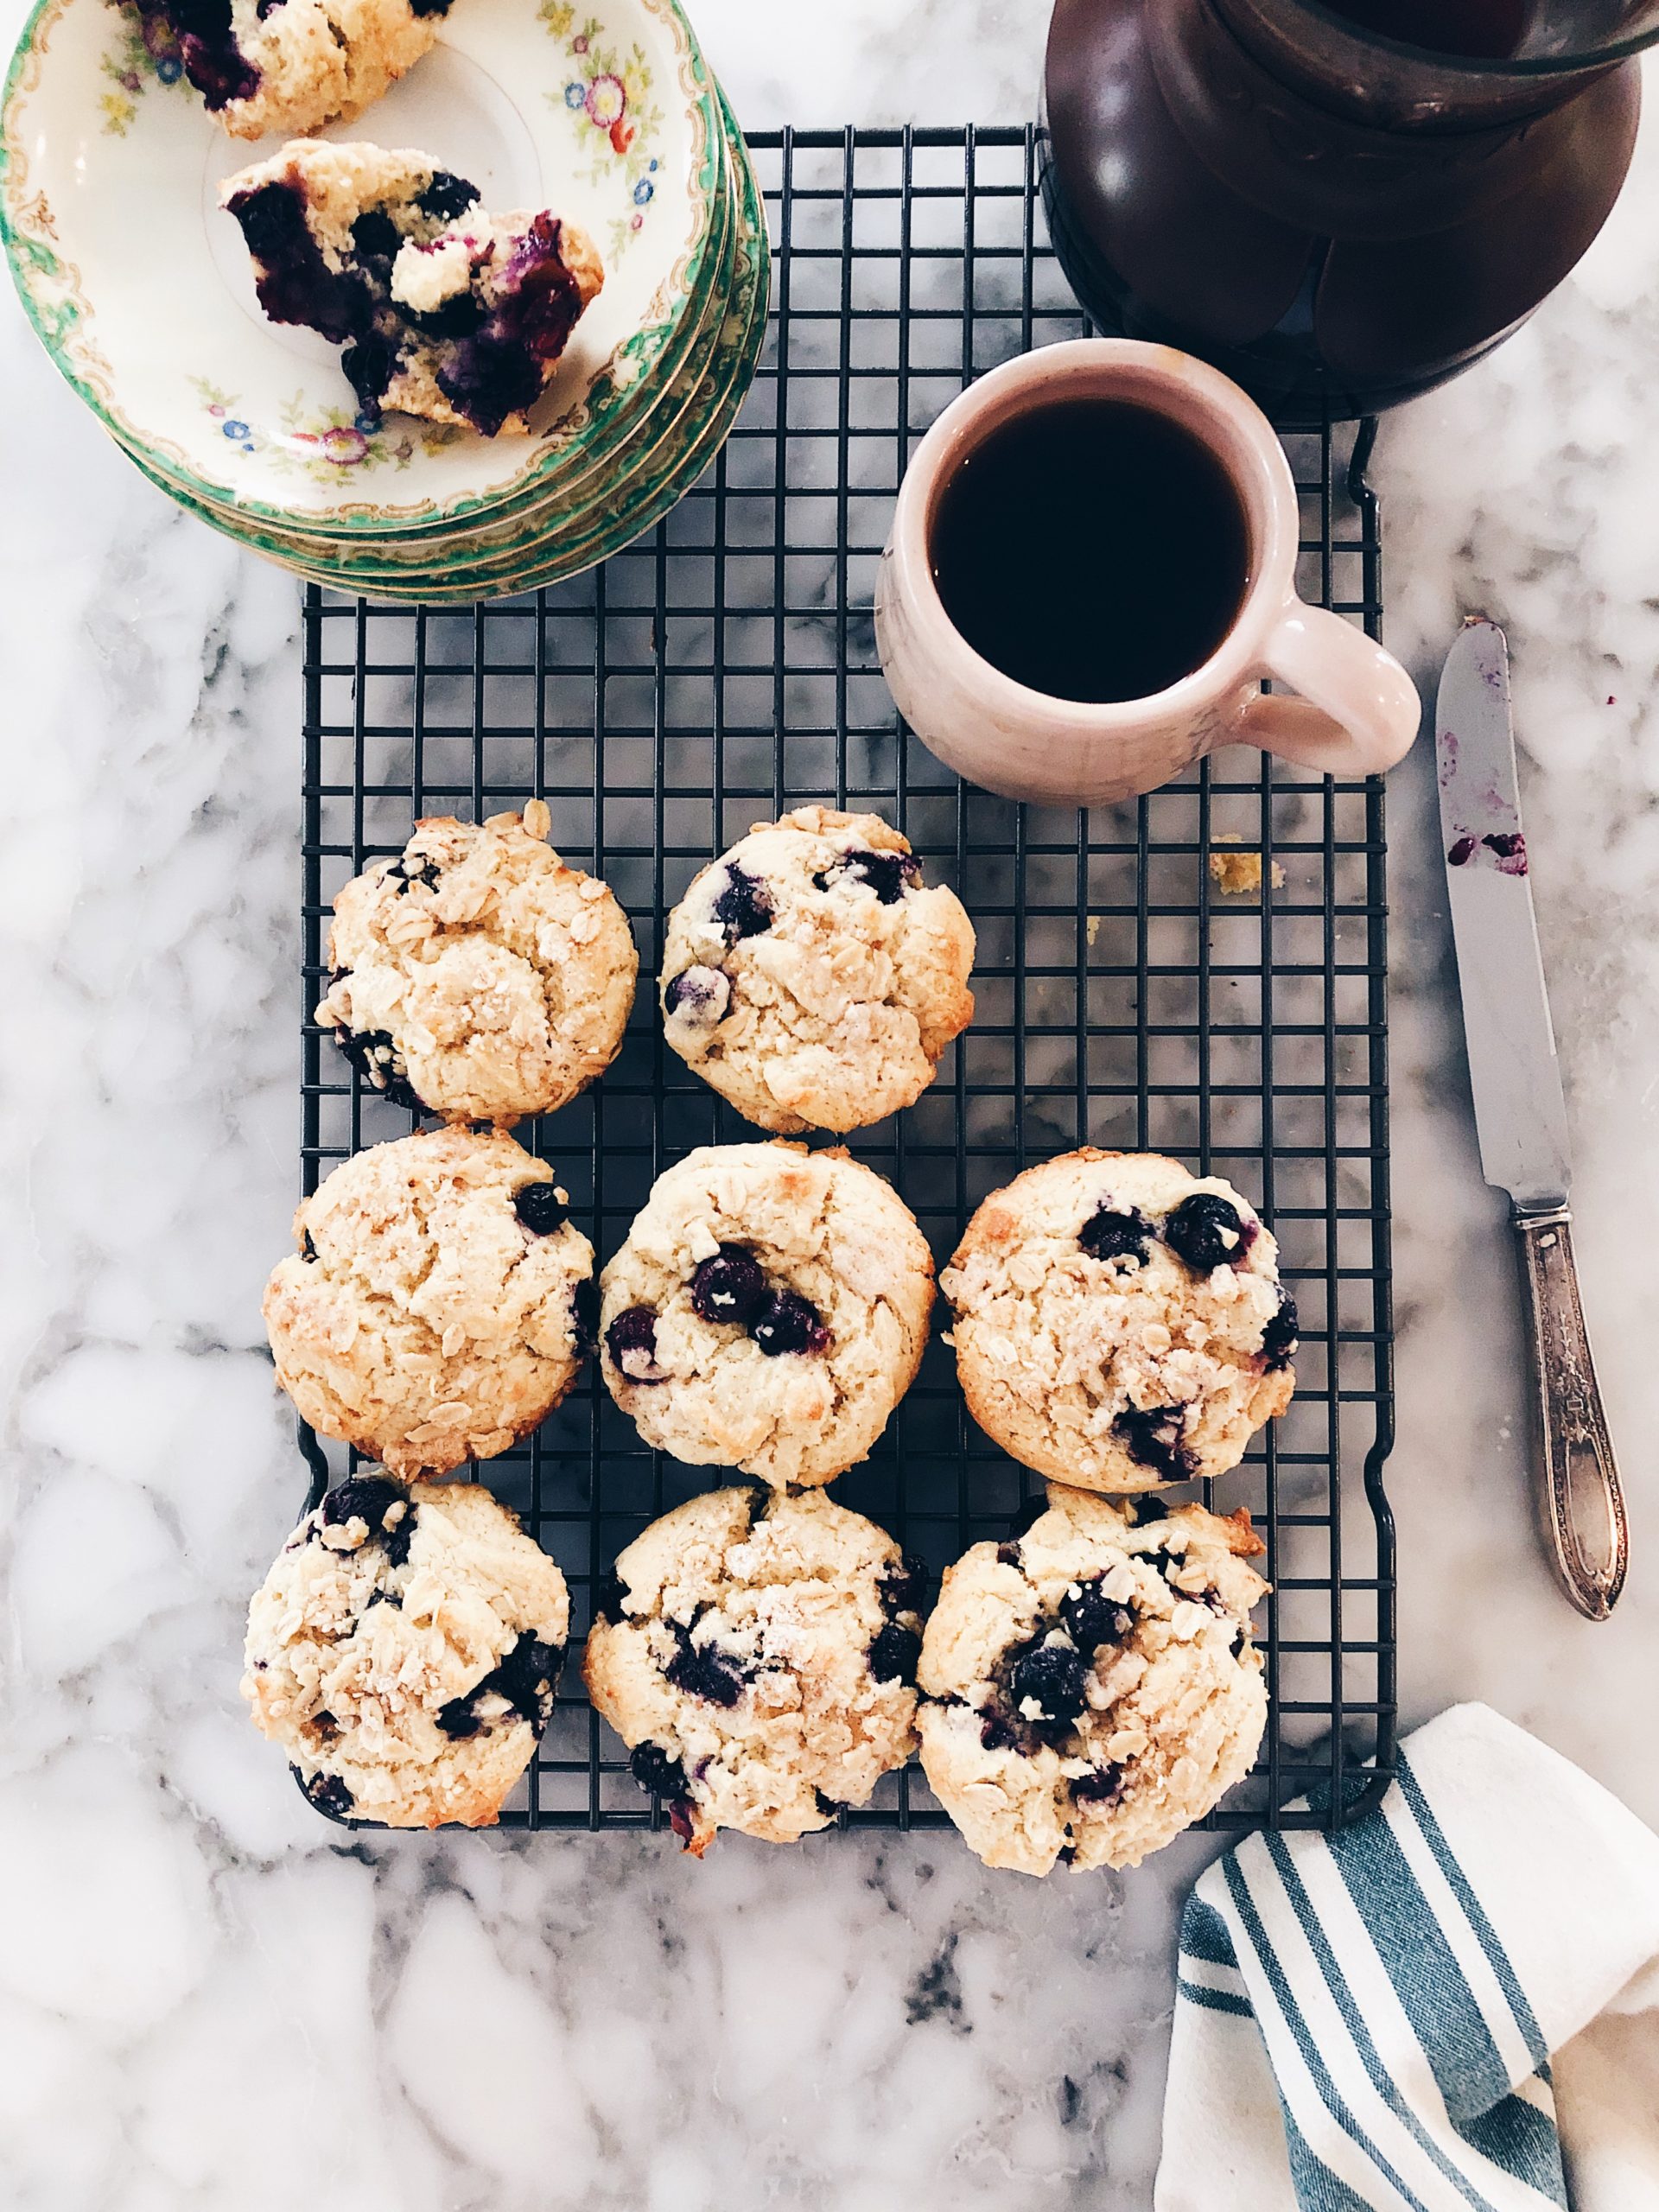 BAKEHOUSE LIVE: Browned Butter Blueberry Muffins - Joy the Baker